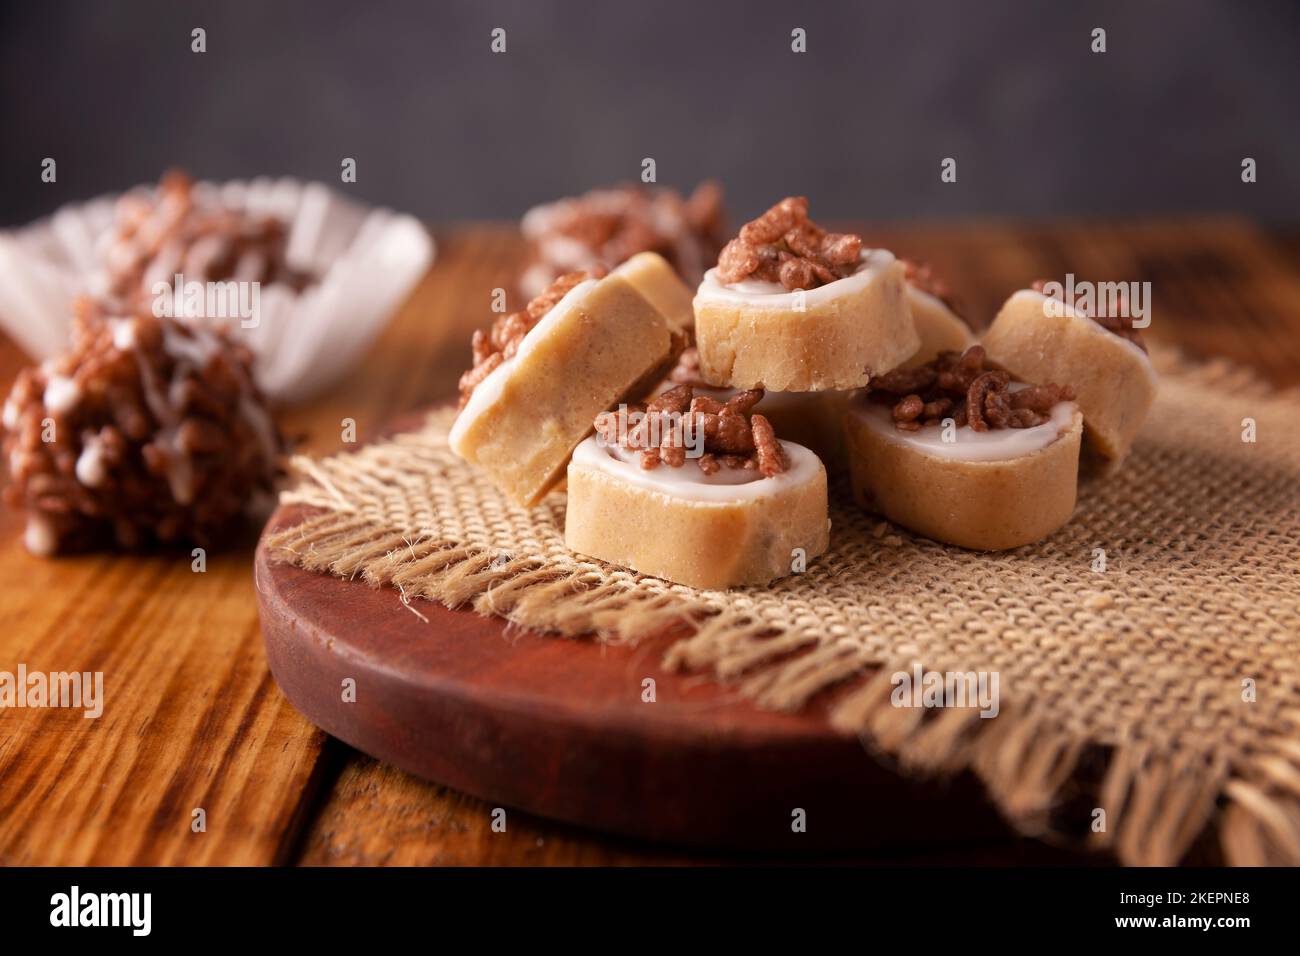 Homemade Mexican sweets, made from sweetened milk, traditionally handmade. Stock Photo